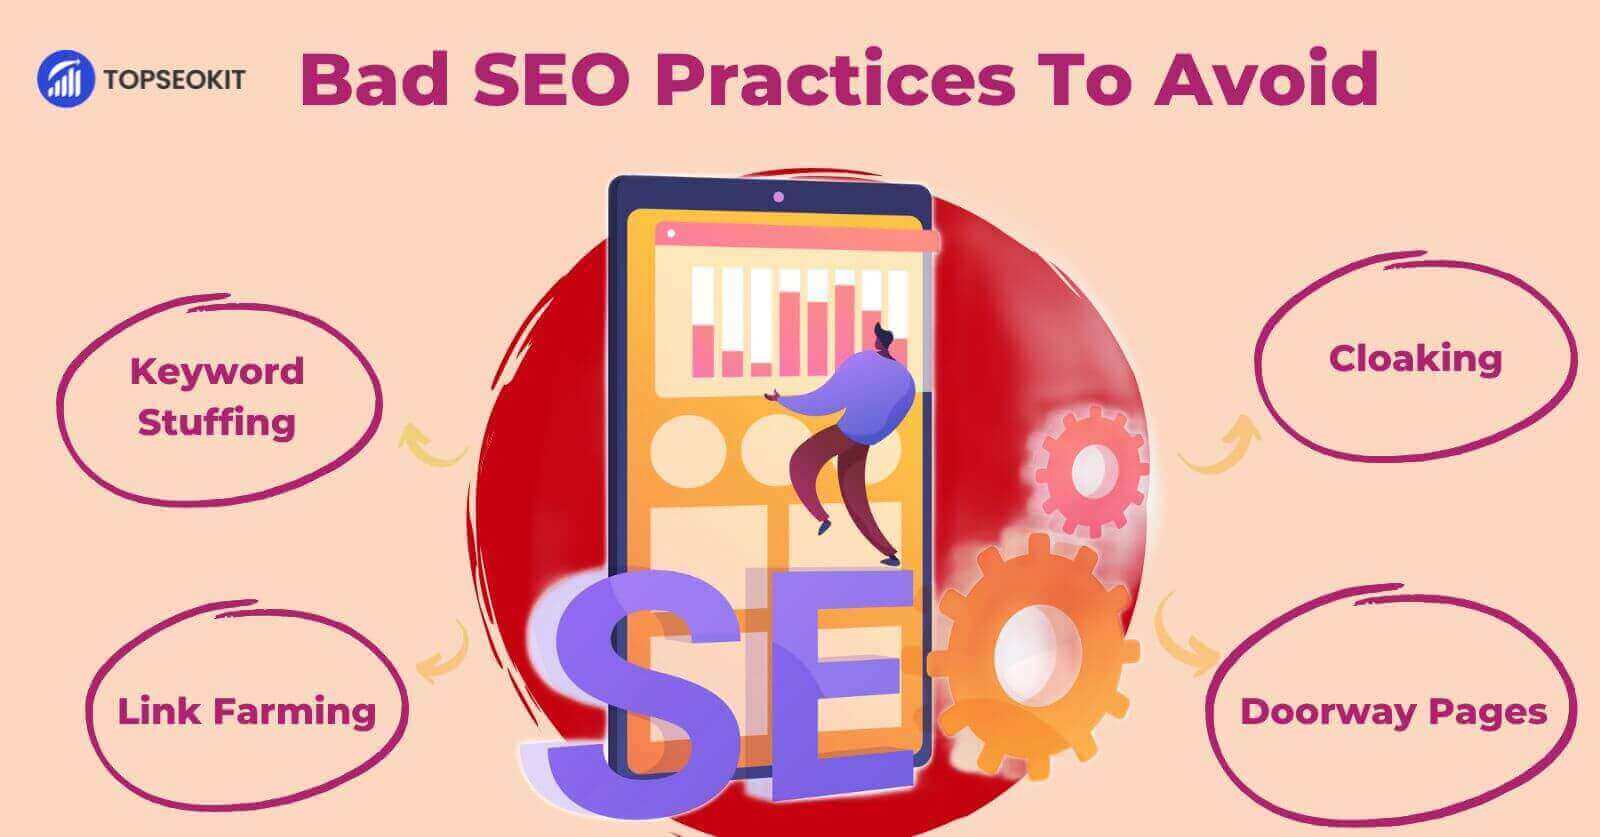 Avoid These Bad SEO Practices for Better Results